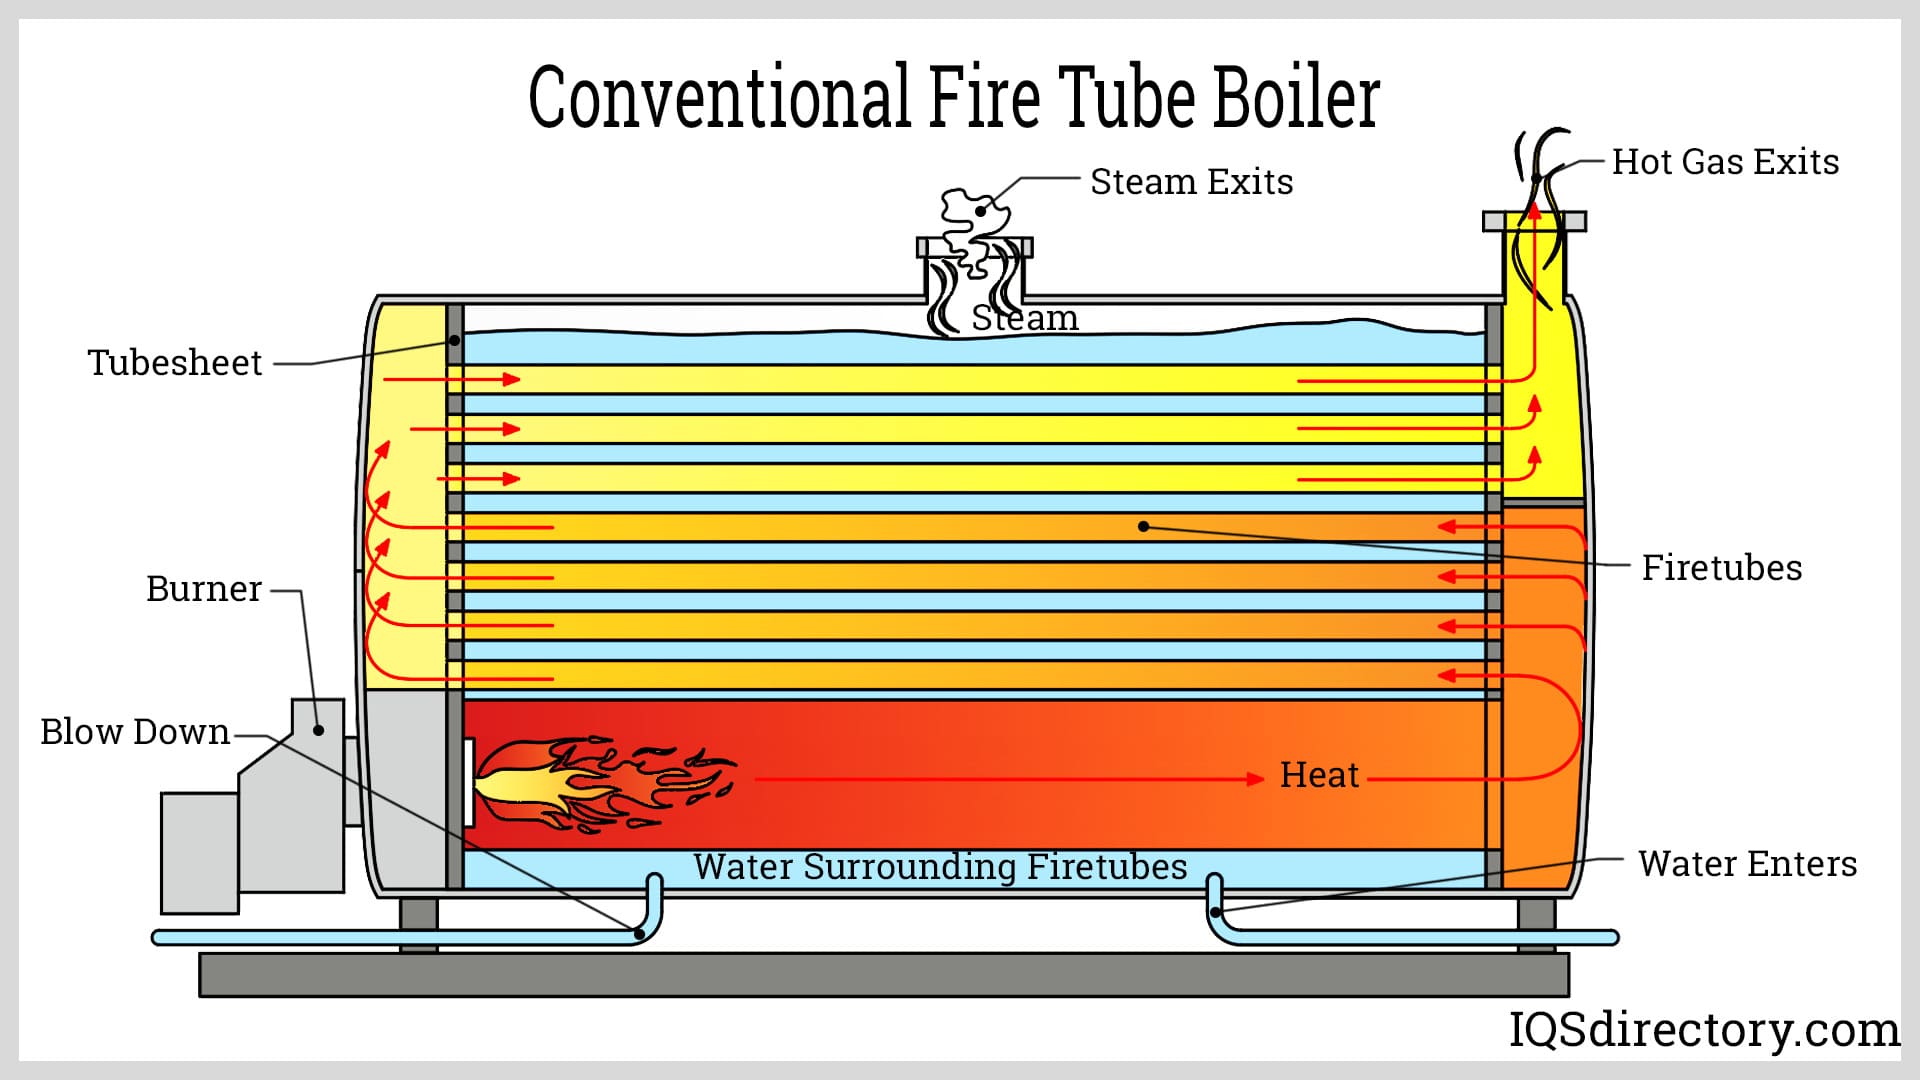 Conventional Fire Tube Boiler